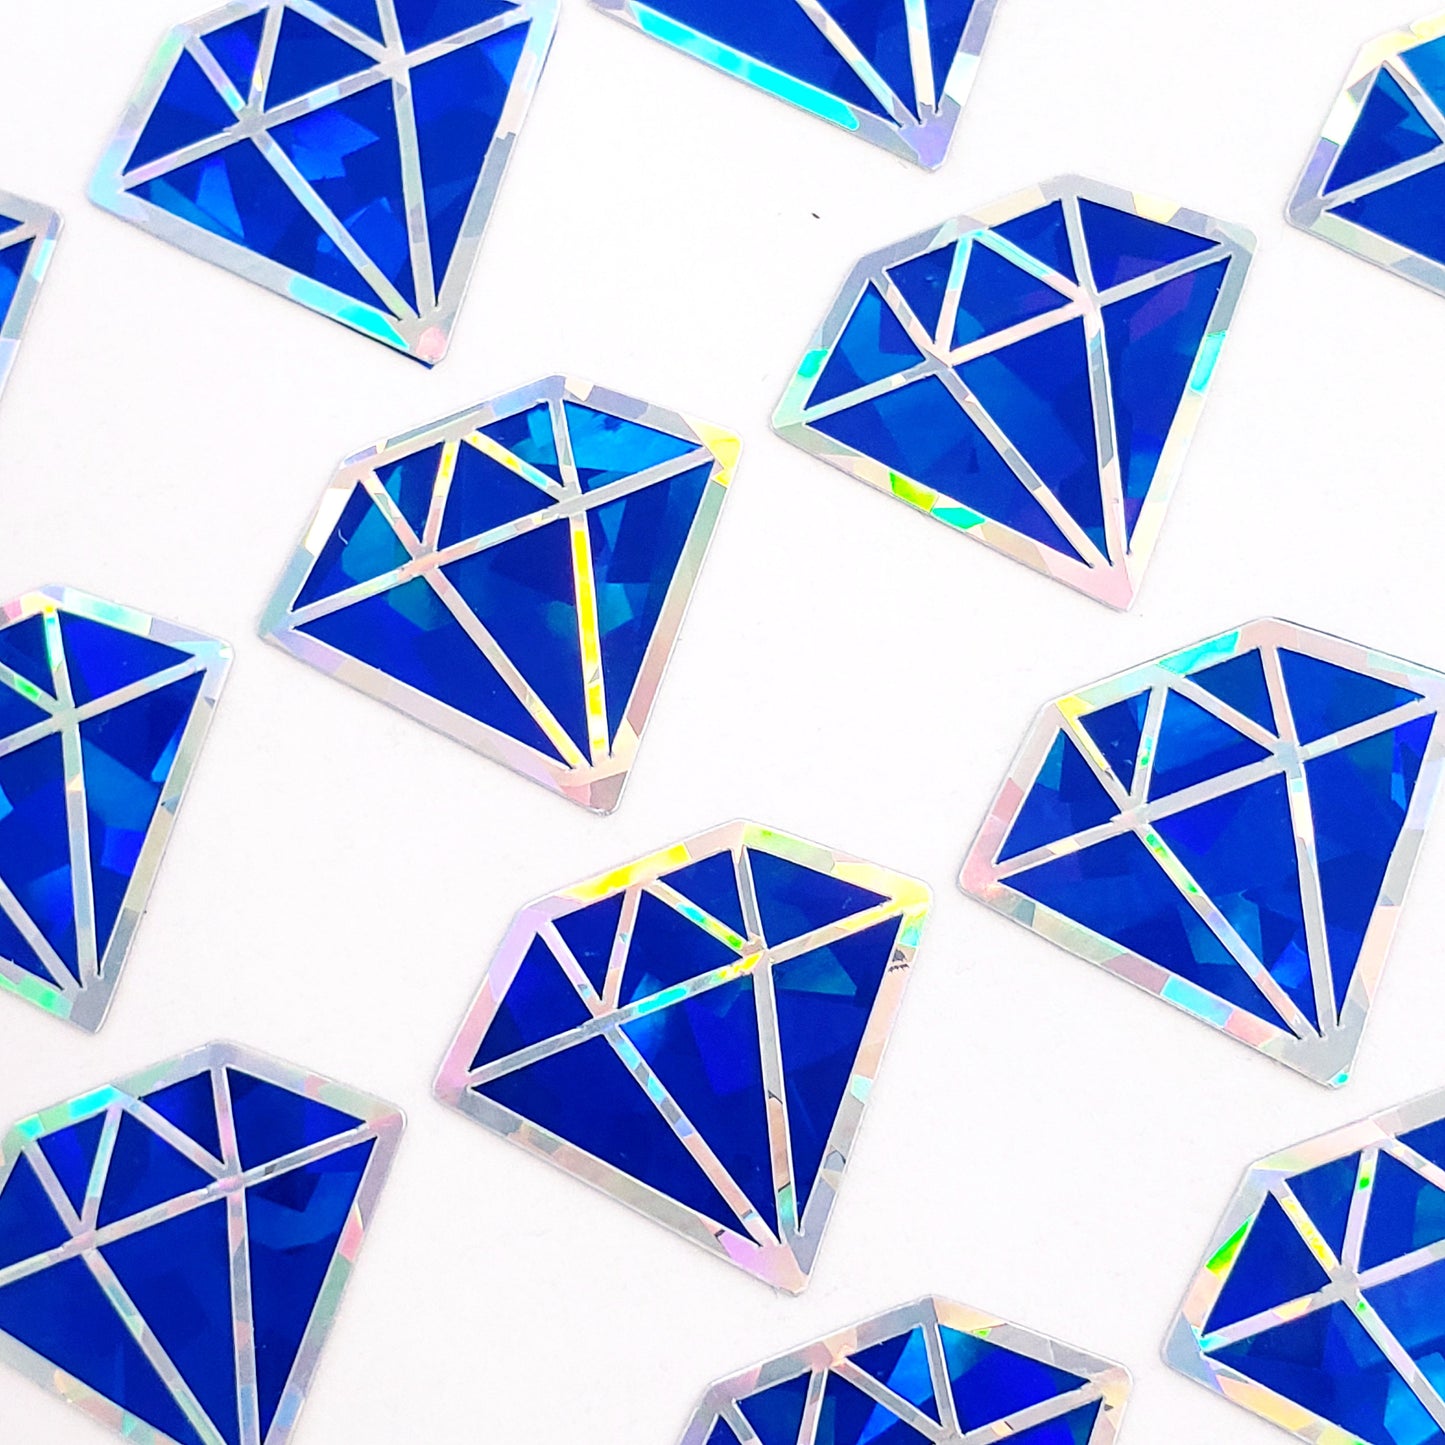 September Birthstone stickers, set of 40 small sparkly sapphire blue decals for gifts, notes, journals and scrapbook embellishments.